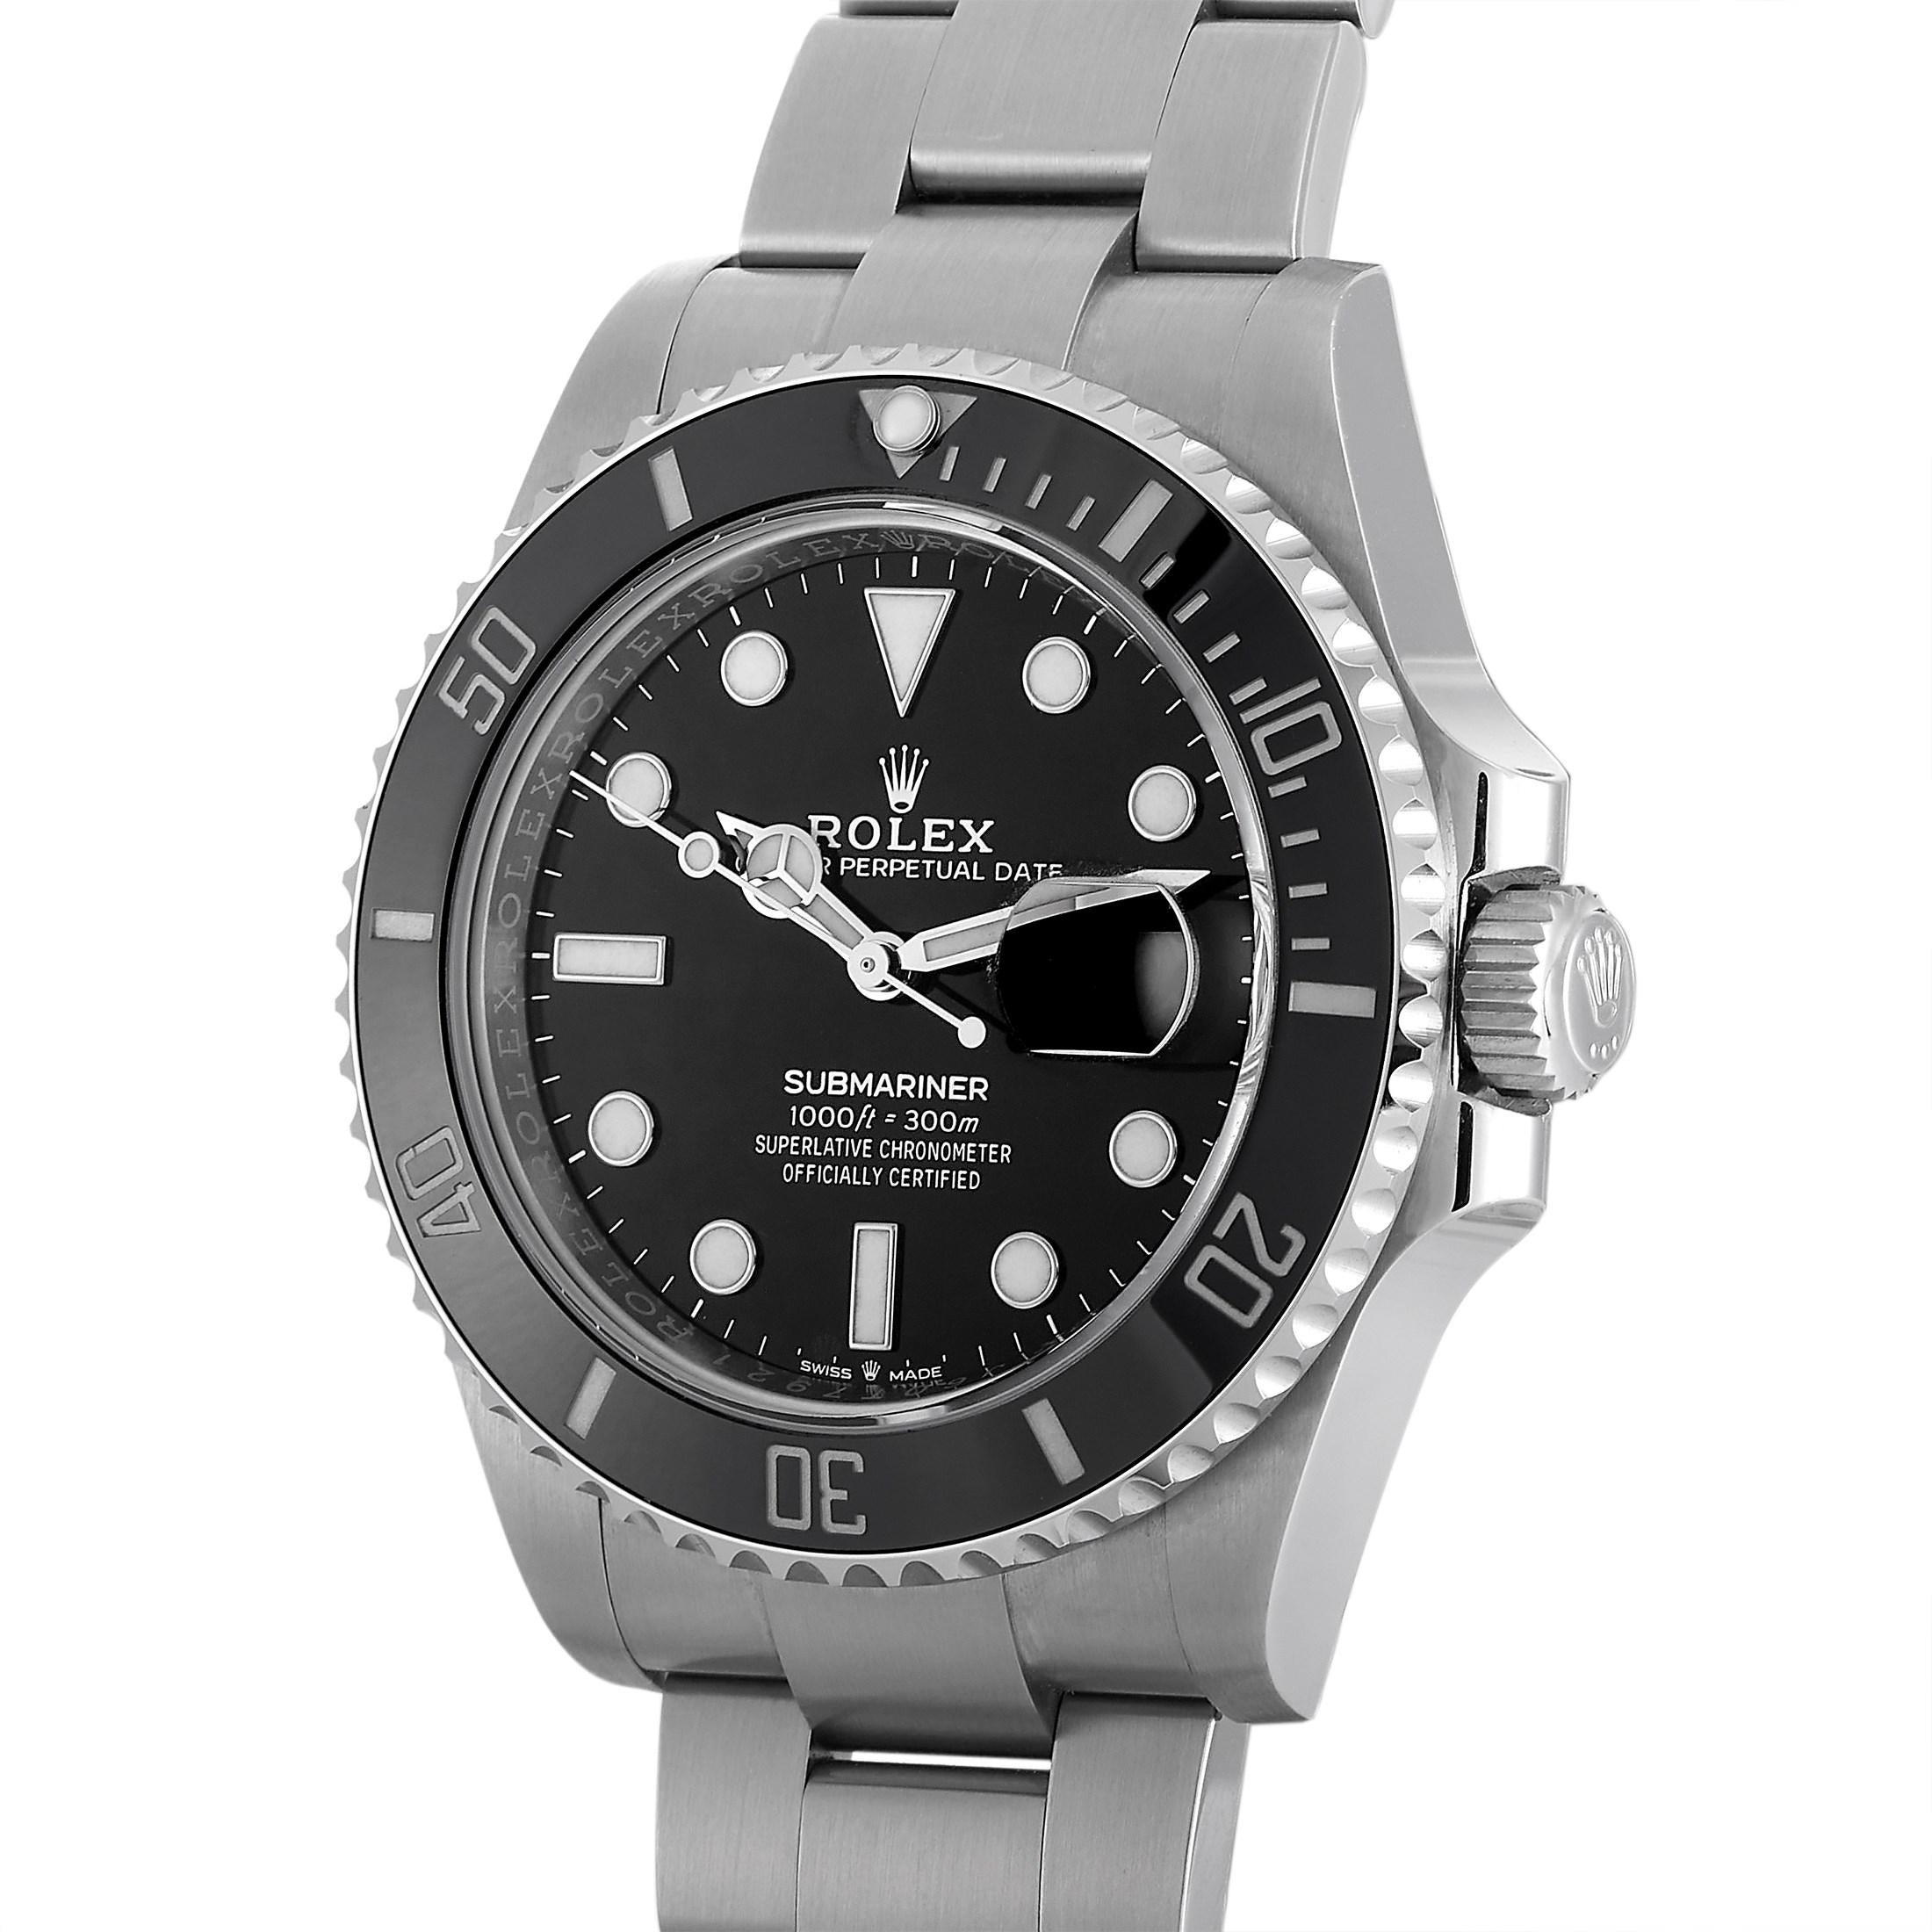 The Rolex Submariner Date has set the ultimate standard for divers’ watches. Representing a historic turning point, the timepiece features a black Cerachrom unidirectional bezel, a black Oystersteel 41mm dial with luminescent hour markers, a solid